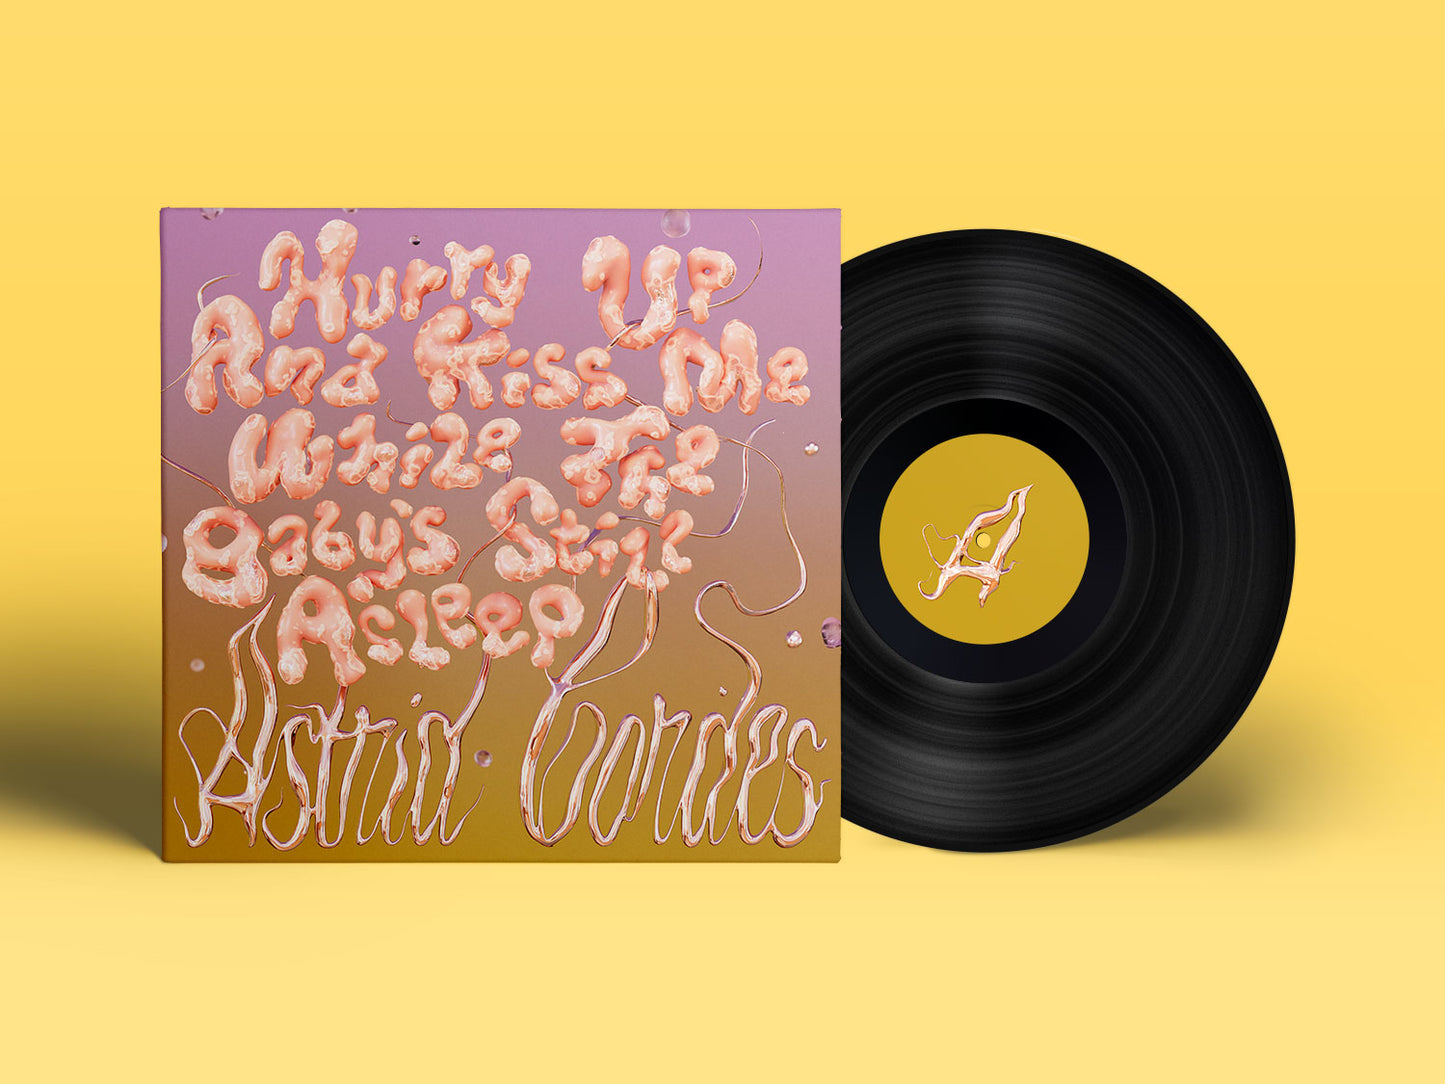 Astrid Cordes - Hurry Up and Kiss Me While the Baby's Still Asleep (2xLP)